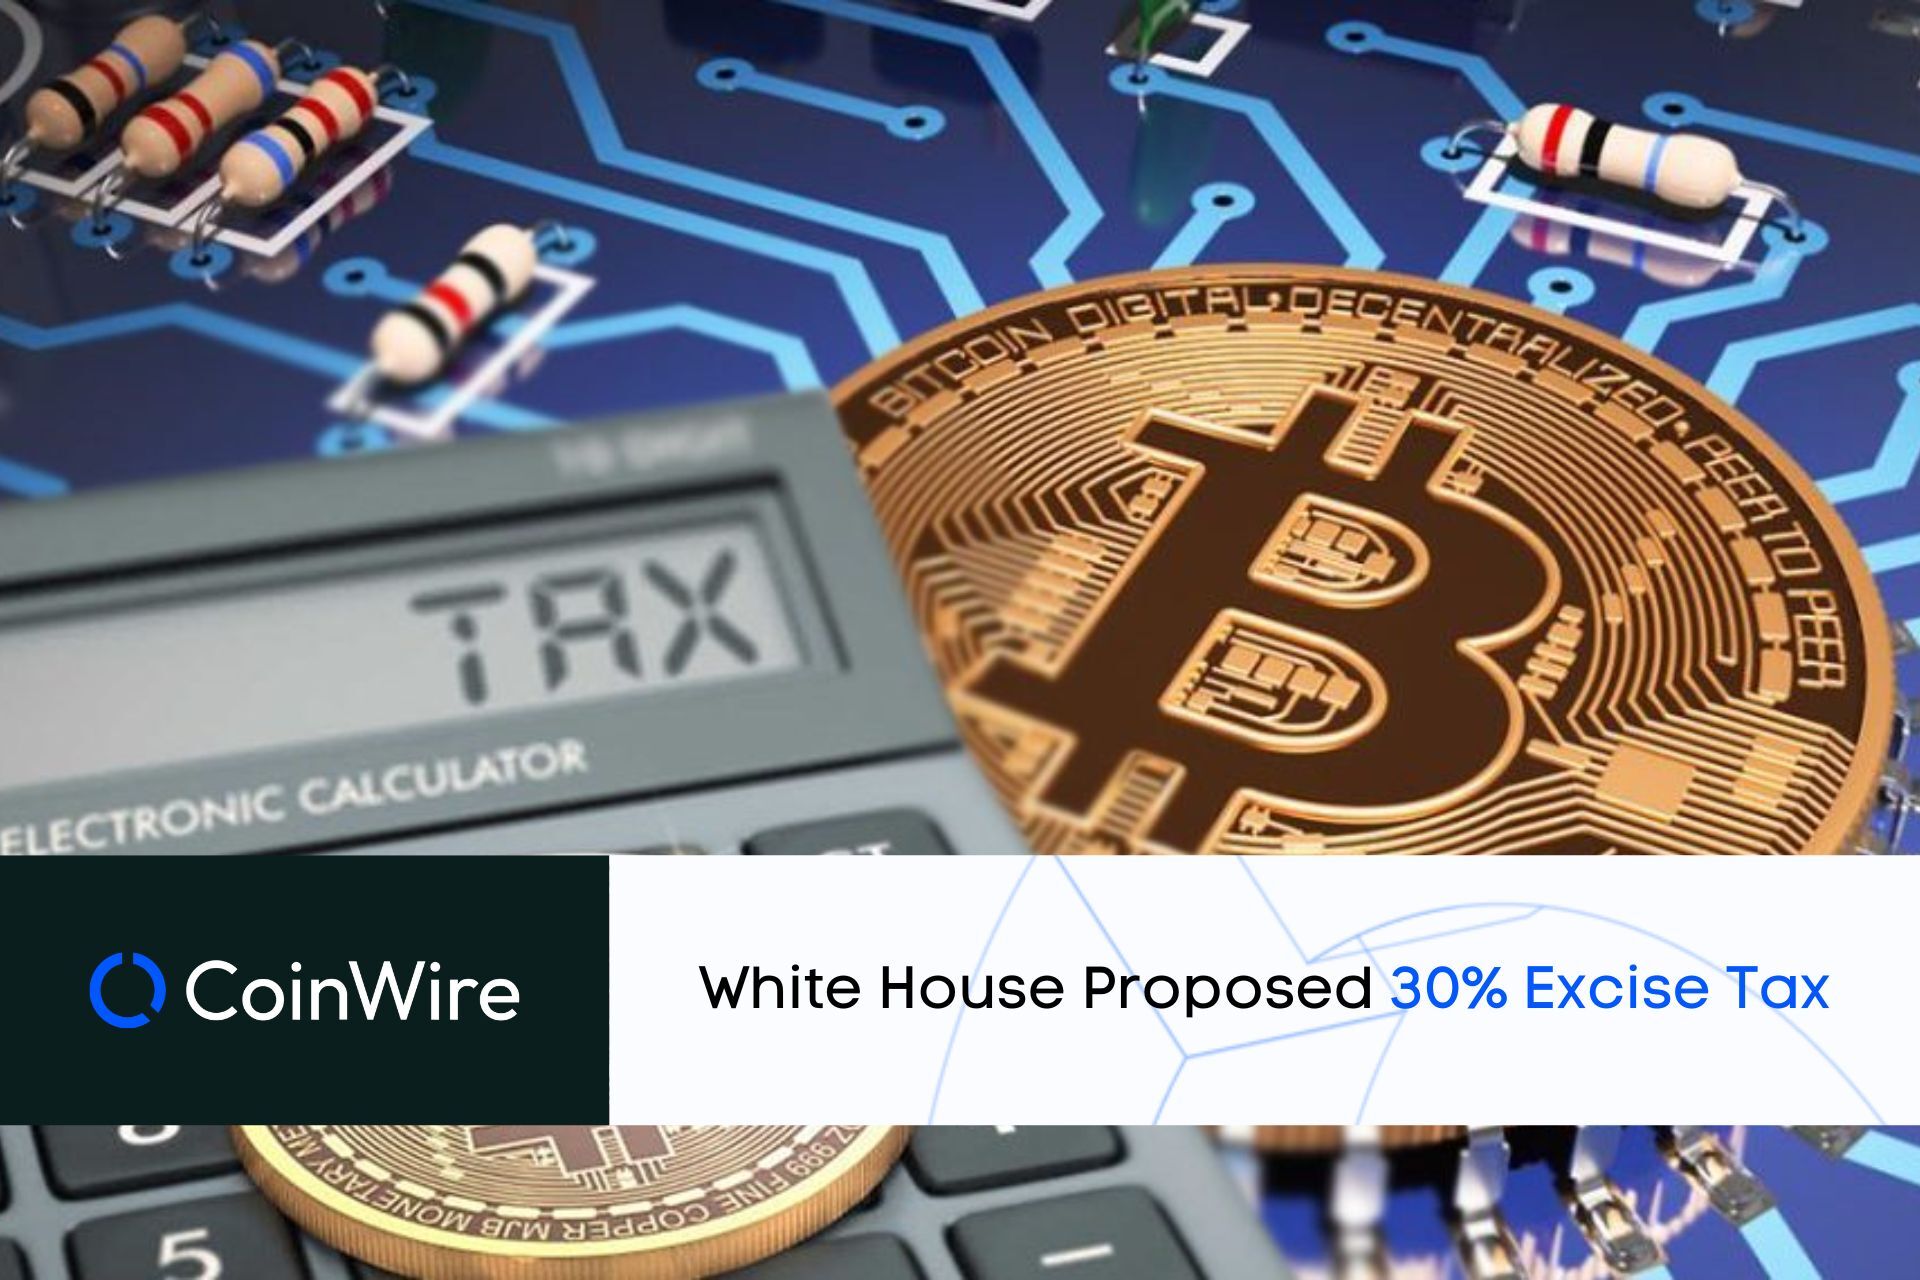 White House Proposed 30% Excise Tax